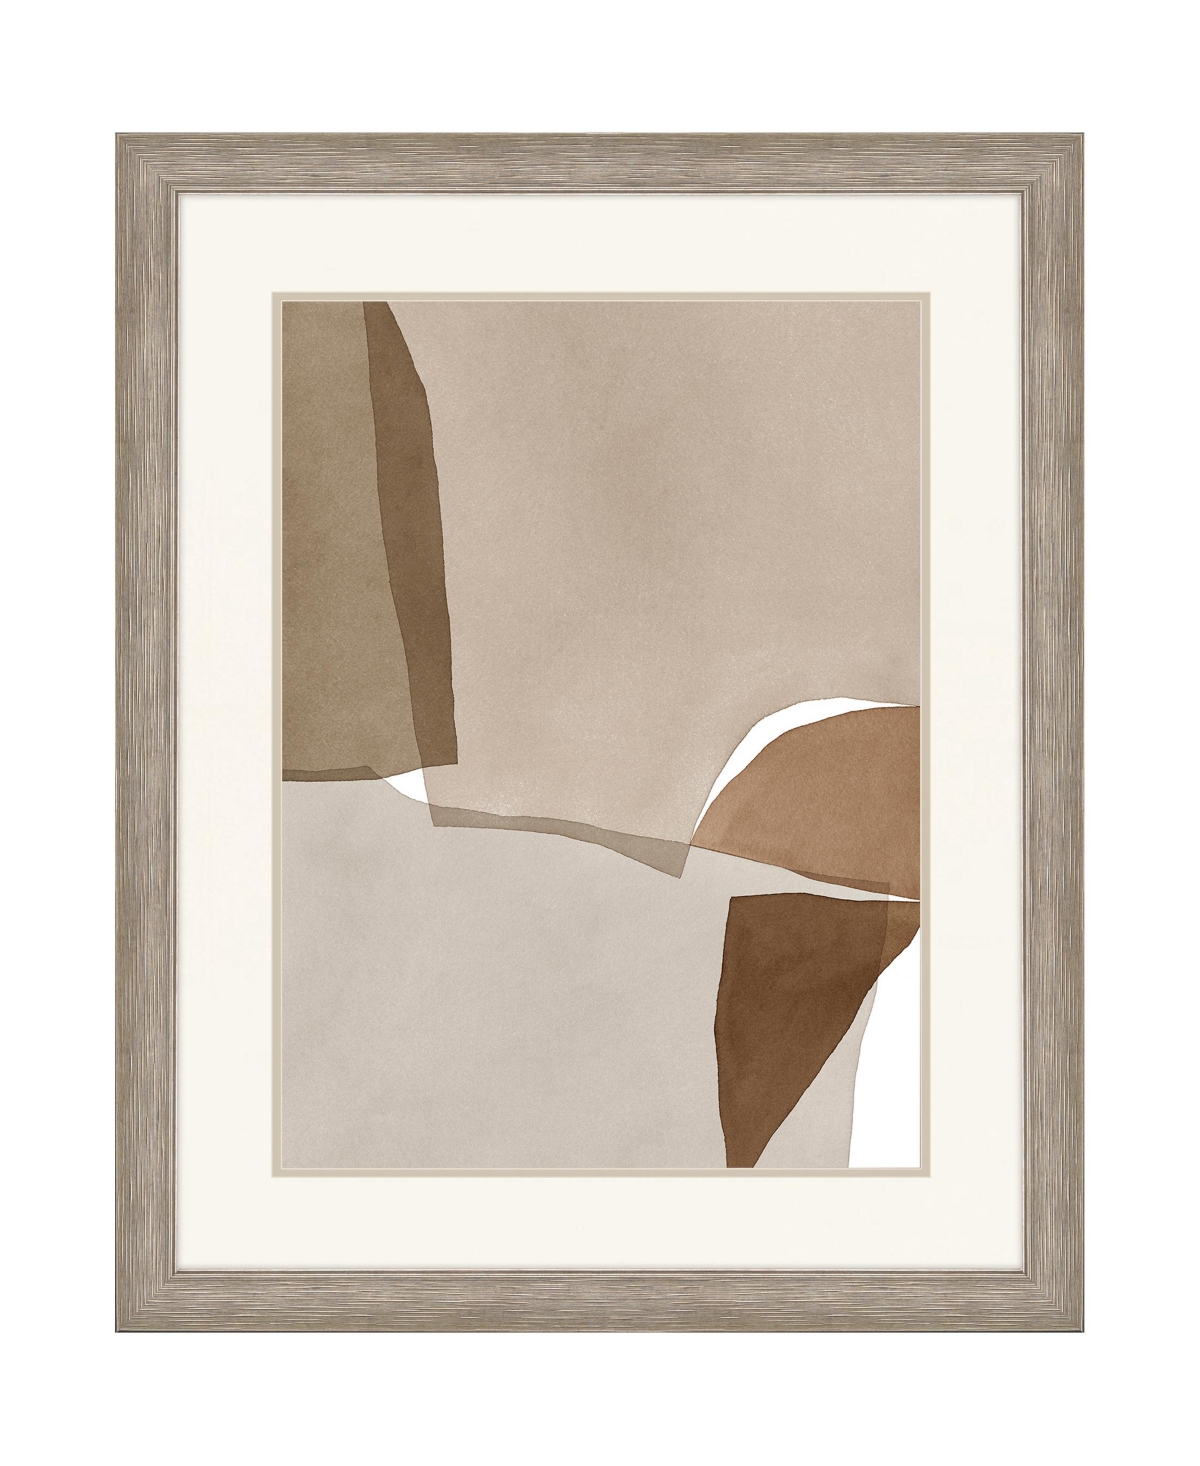 Paragon Picture Gallery Translucent Harmony Framed Art In Beige